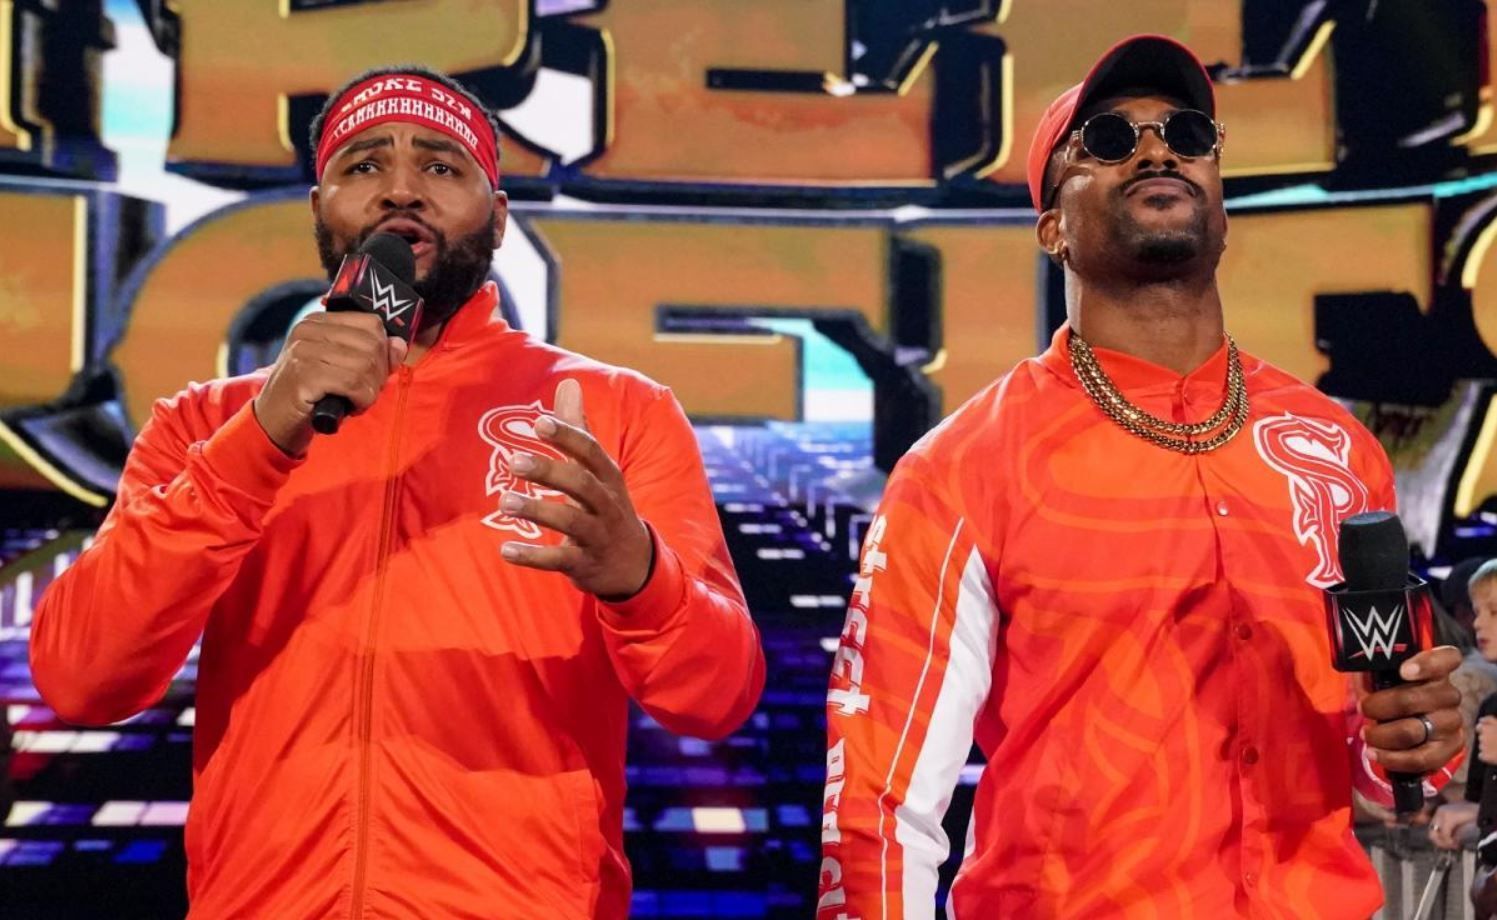 The Street Profits are former RAW Tag Team Champions